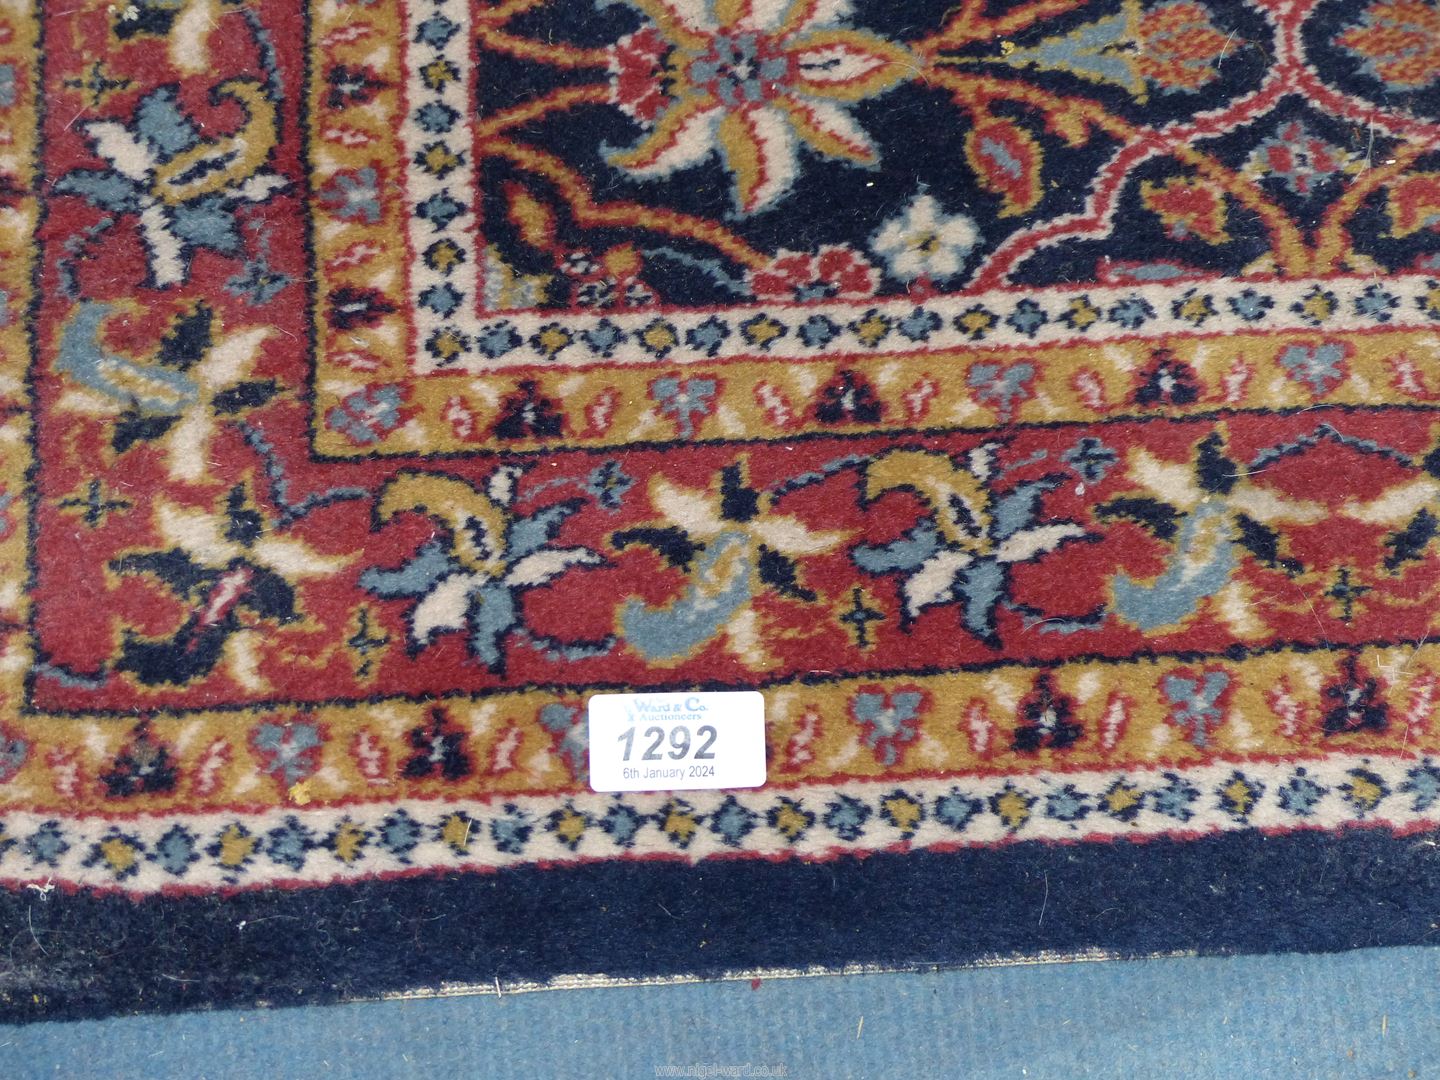 A 'Gumussuyu carpet collection' Wool runner in blue, red and orange with stylised floral design, - Image 4 of 5